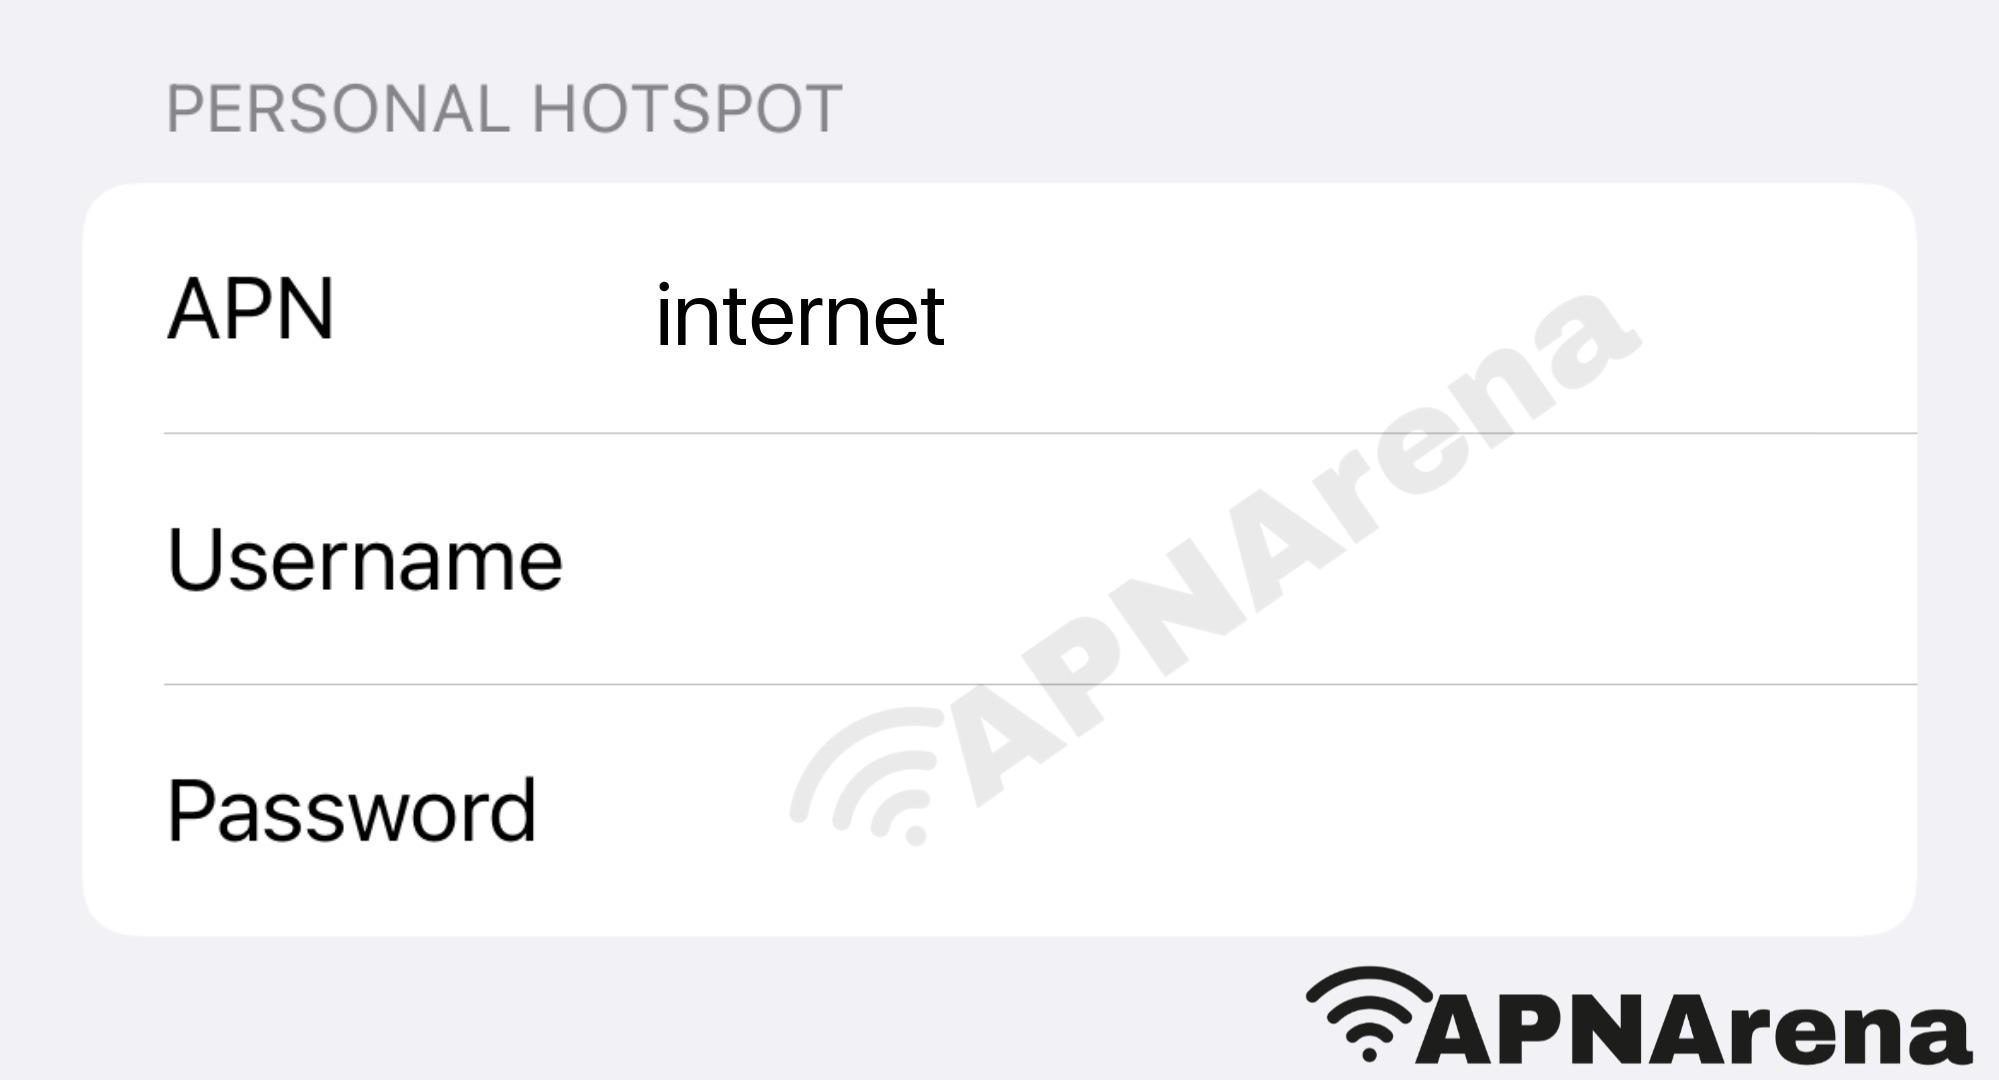 bmobile Trinidad and Tobago Personal Hotspot Settings for iPhone